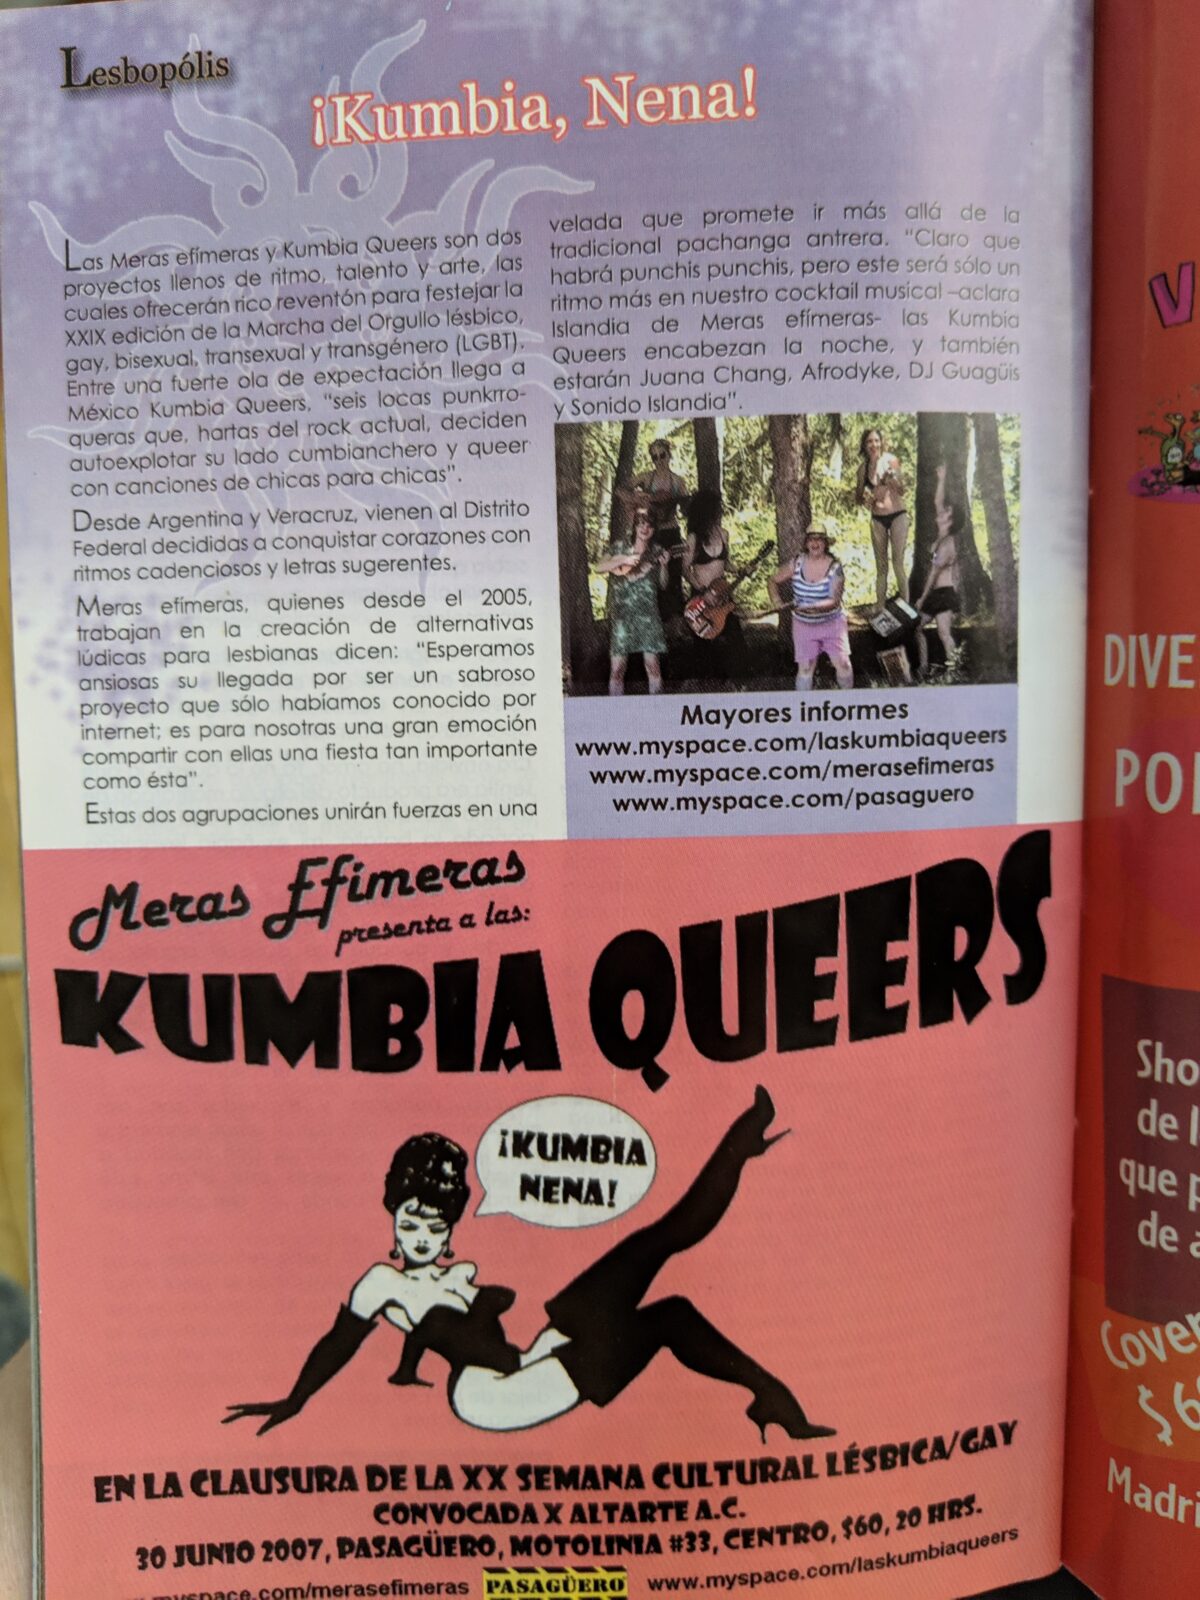 The photo shows a page from an old issue of "Homópolis". In it, the top half of page features content about a Kumbia Queers show written by Meras efímeras. Bottom half is an ad for a Meras efímeras party in which the band will play.